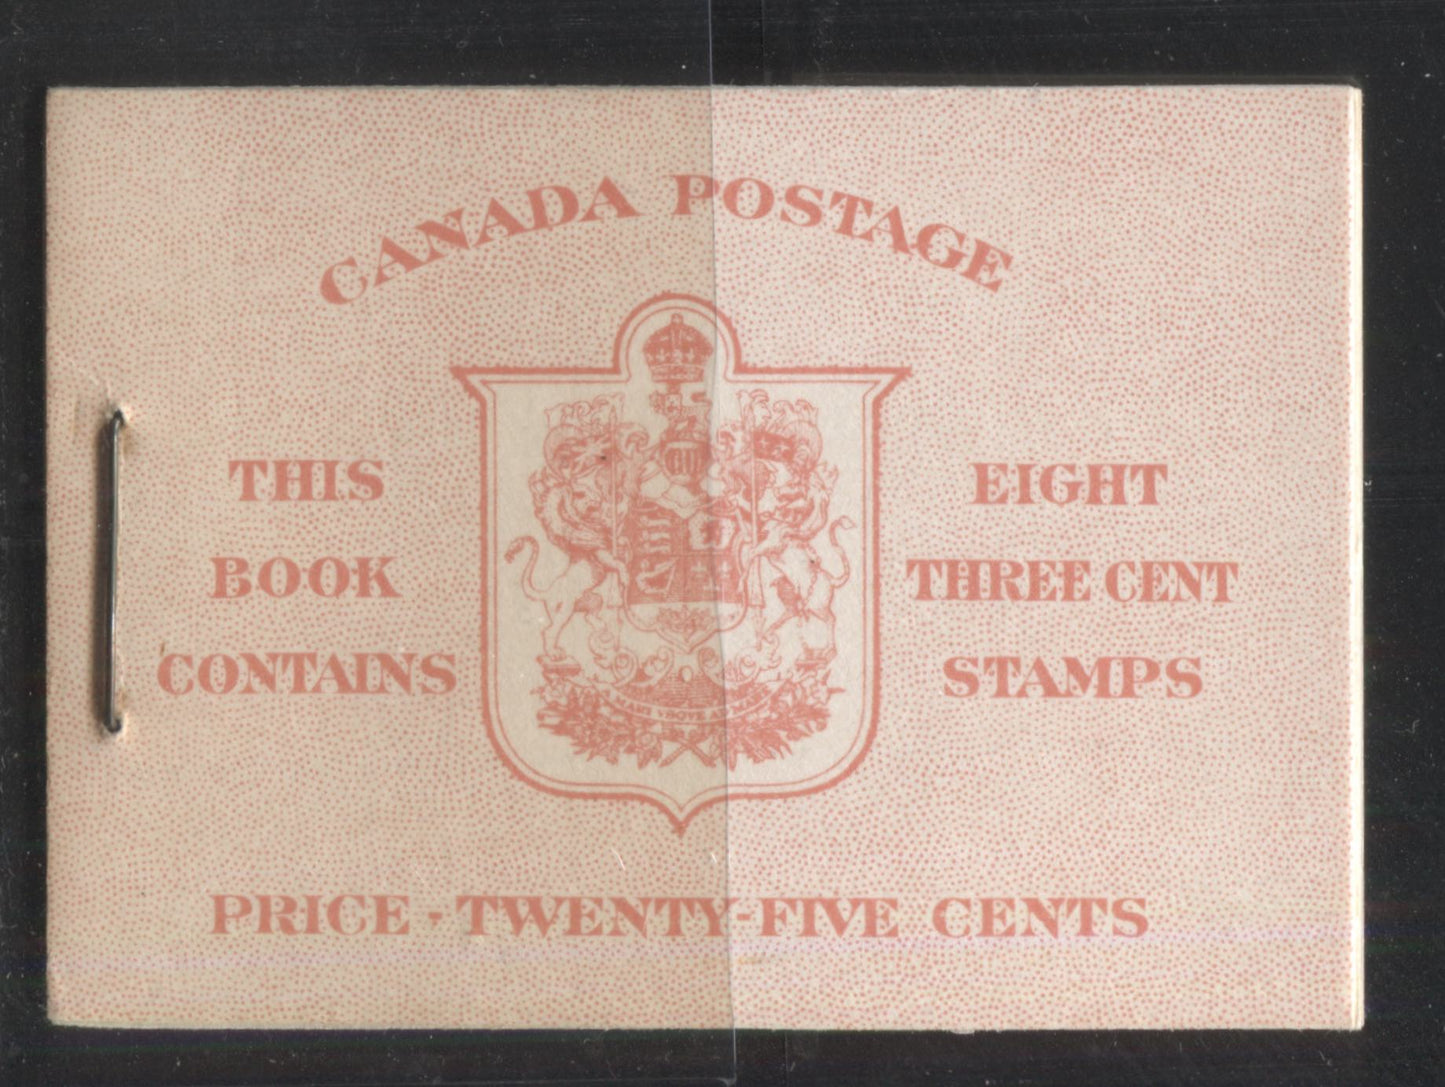 Lot 240 Canada #BK34a 1942-1949 War Issue, Complete 25¢ English Booklet, Smooth Vertical Wove Paper, Type II Covers, Harris Front Cover Type IIe, Back Cover Type A, 6c Airmail Rate Page